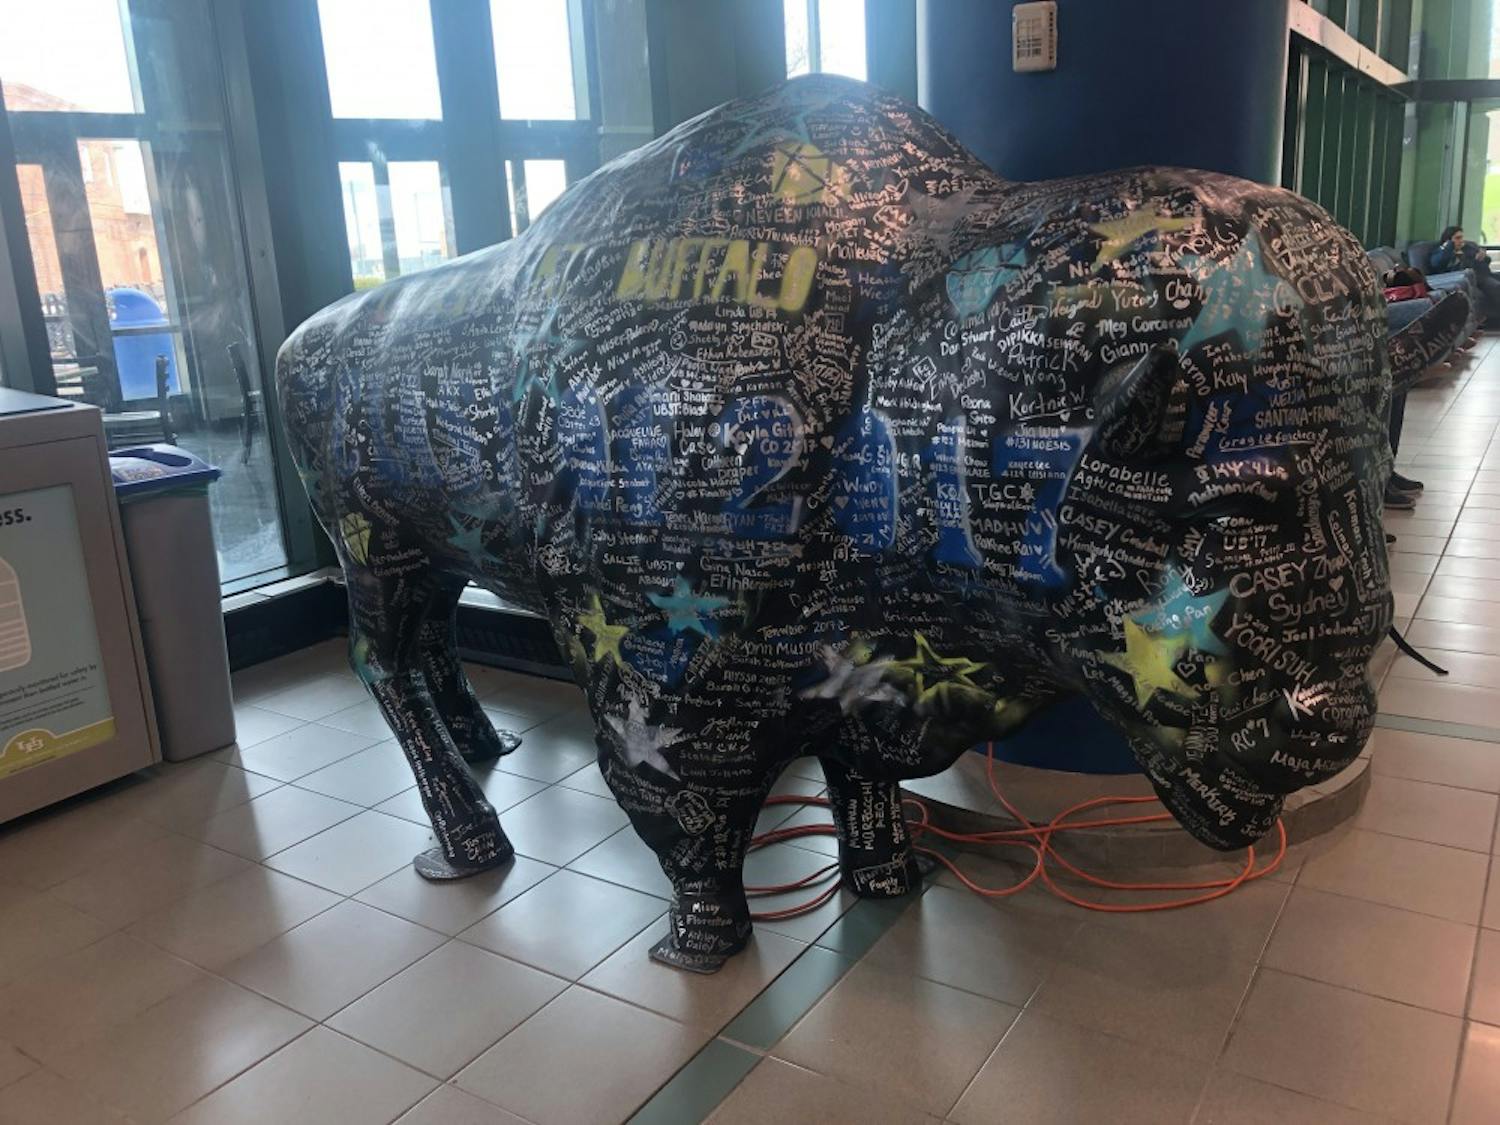 The Sign-A-Bull program would have been 8 years old this year under Student Engagement. Bulls appear across campus and feature hundreds of signatures from graduating seniors.